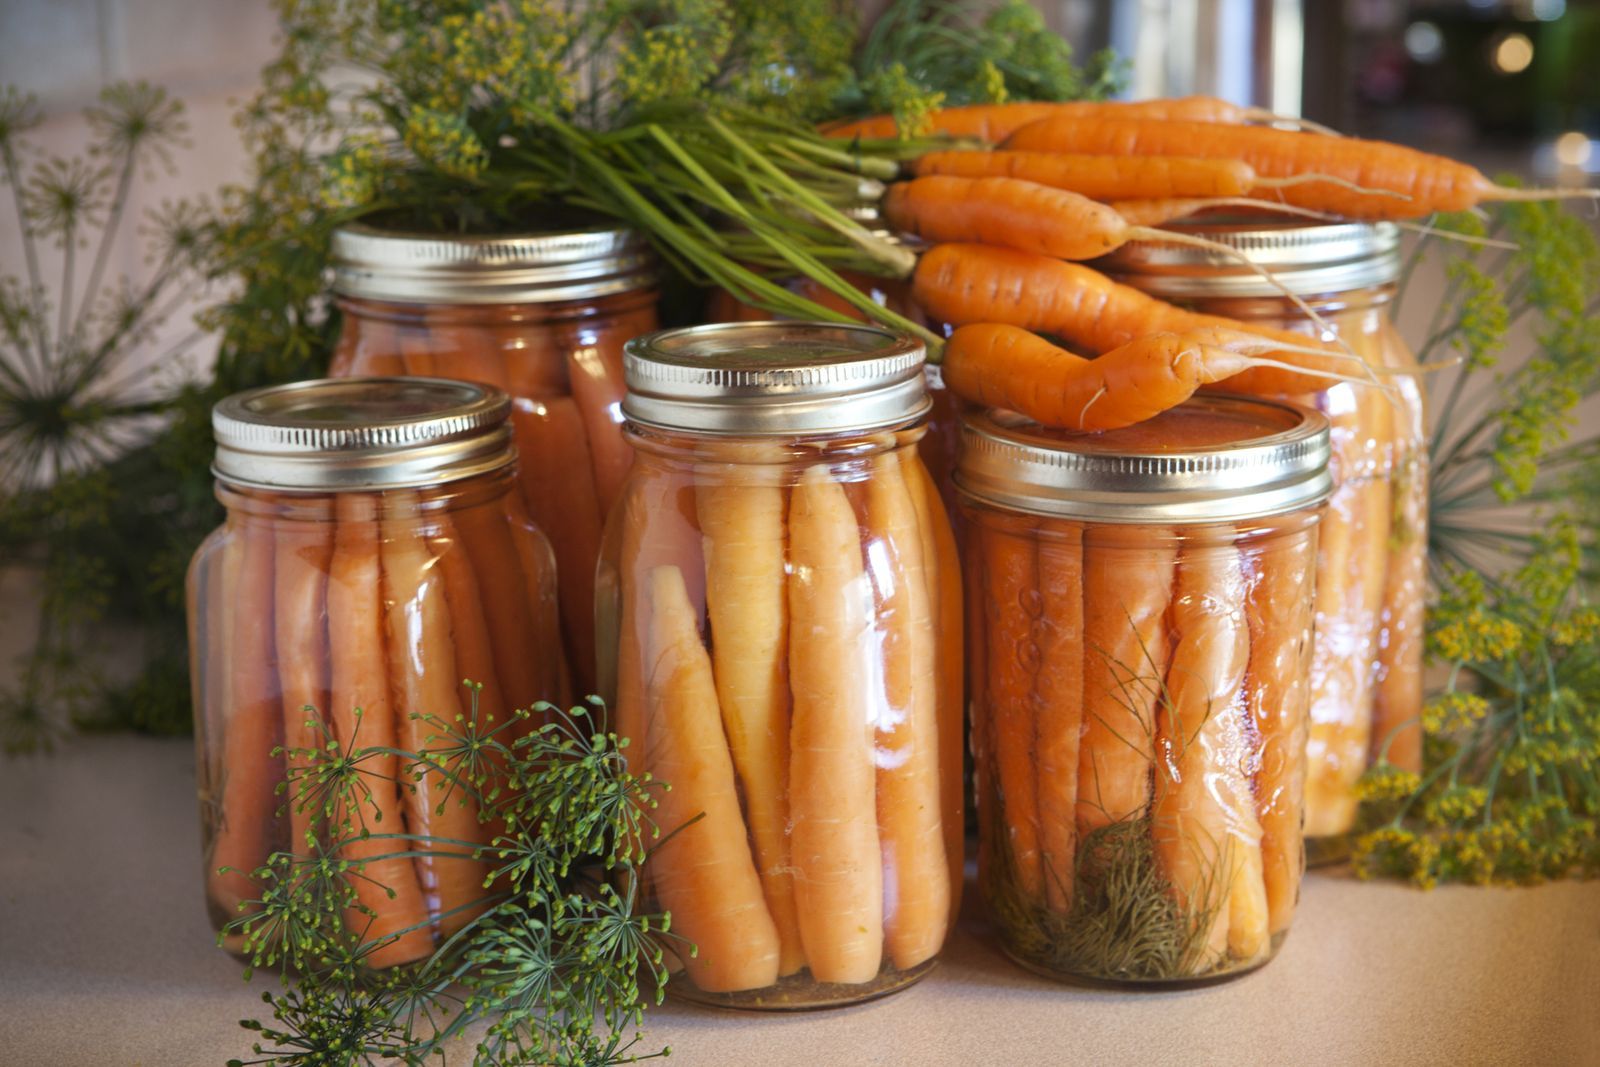 How to properly store carrots at home